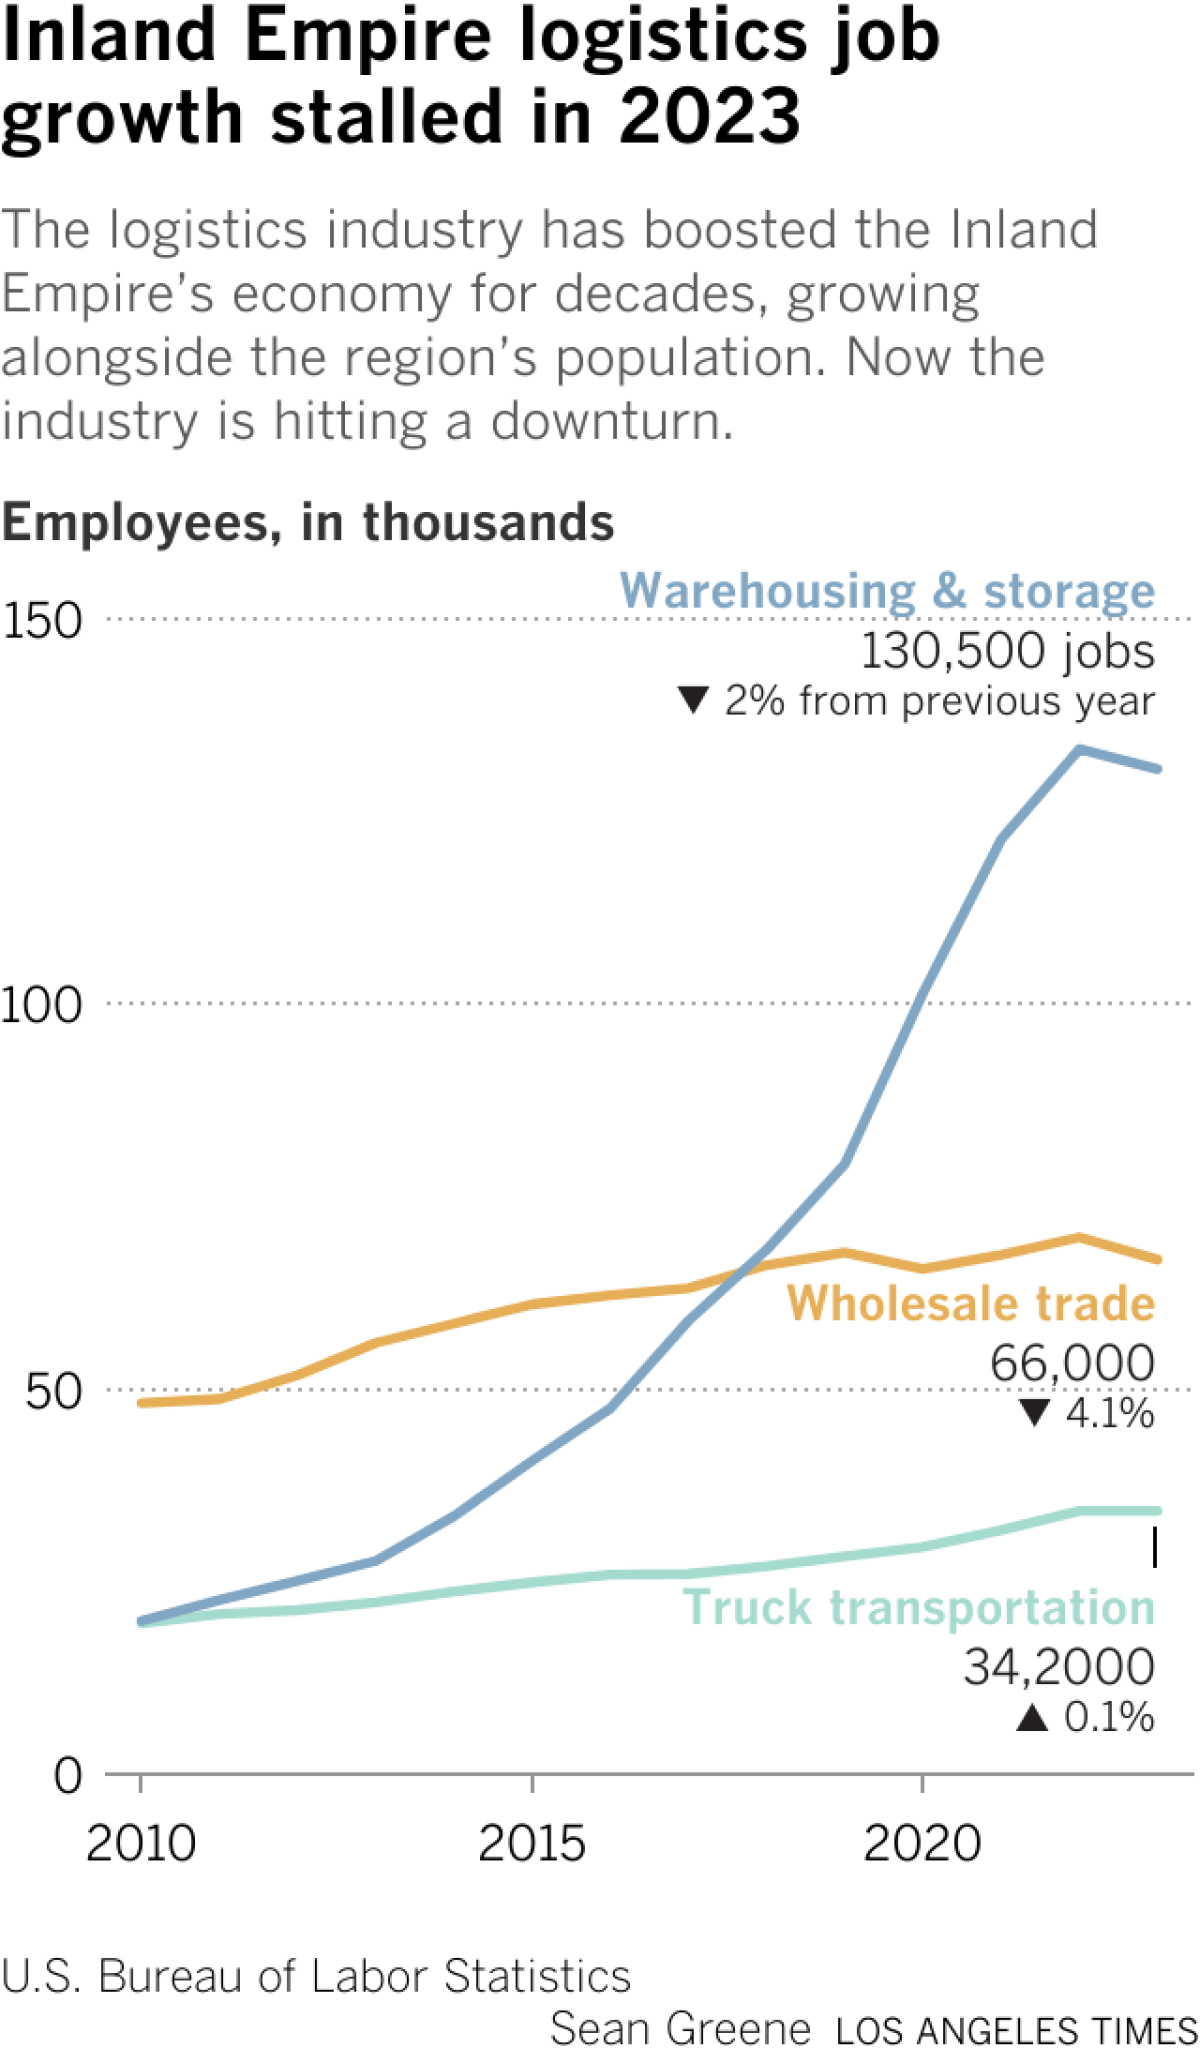 Line chart shows the rise and stall of logistics jobs from three different sectors since 2010. Warehousing and storage job growth peaked in 2022 then dropped 2%. Truck transportation and wholesale trade saw slower growth through 2022 before stalling or dropping off in 2023.